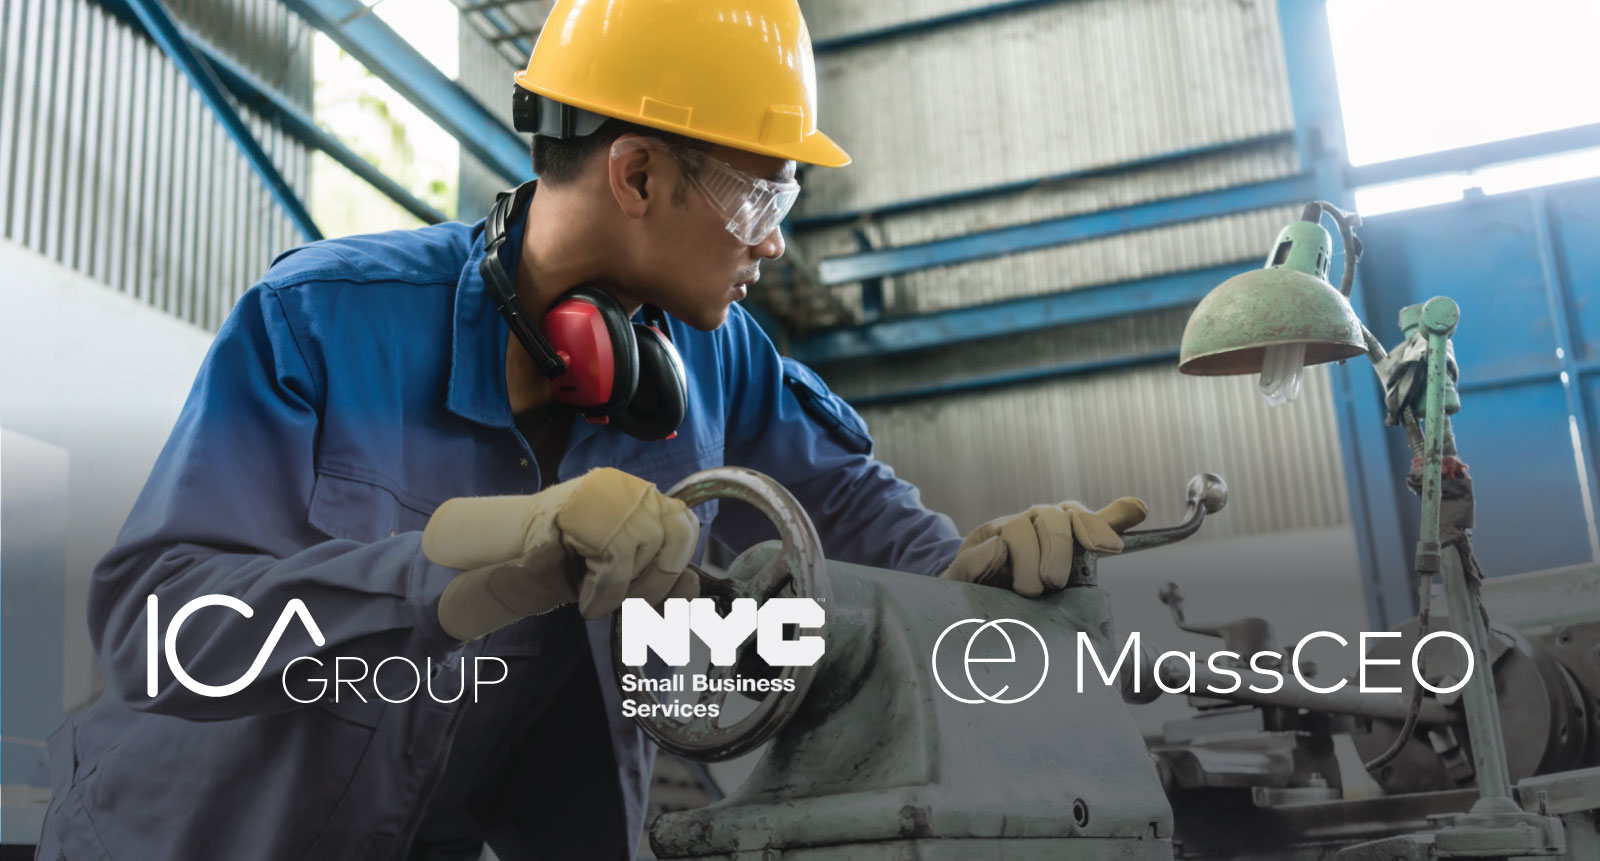 Worker in safety gear using machinery. Overlaid with the logos for The ICA Group, NYC Small Business Services, and MassCEO.